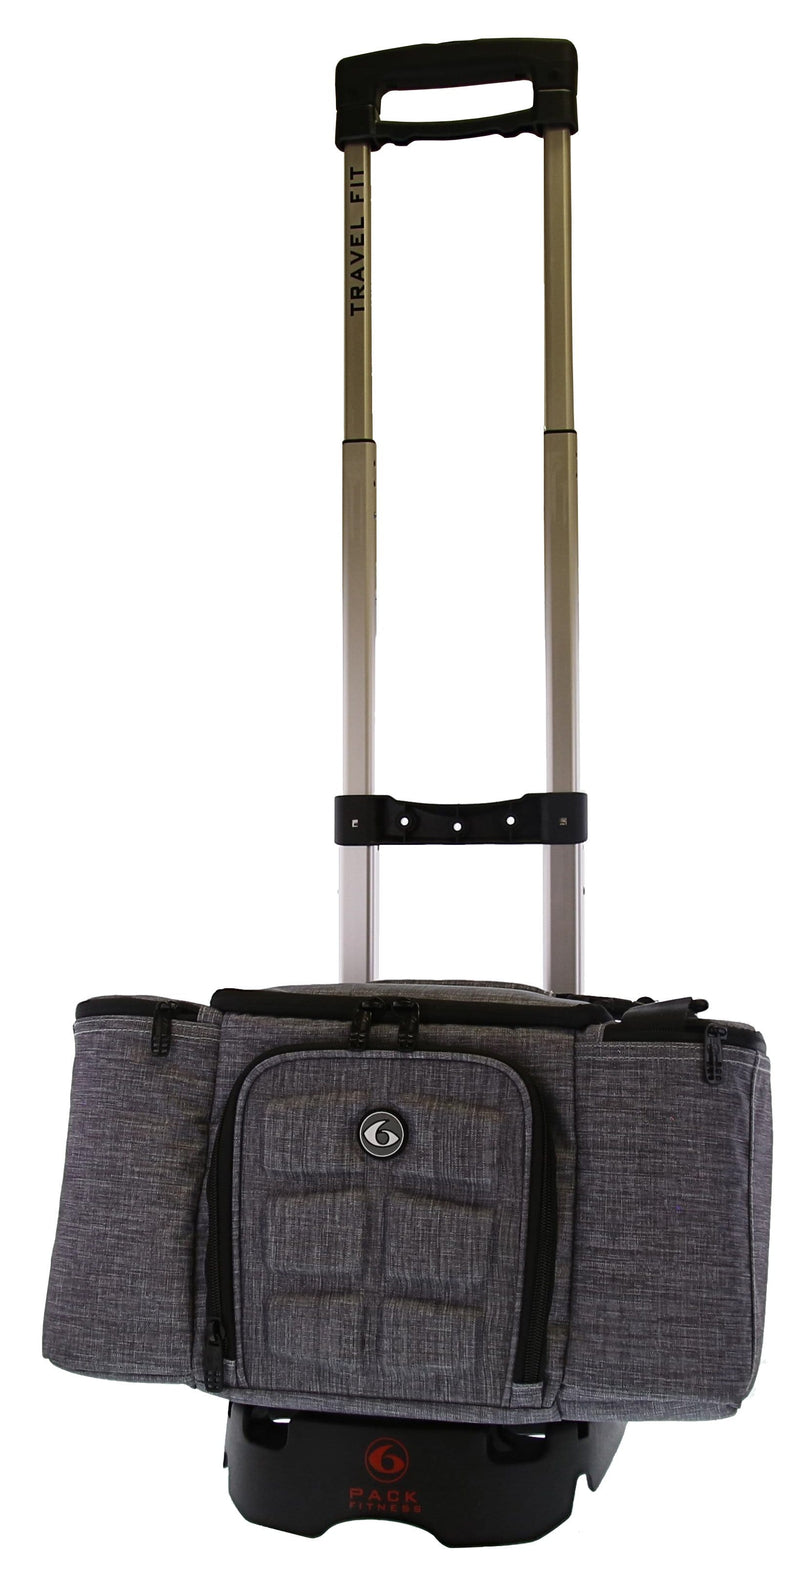 Trolley Bag and Luggage System - (Black/Silver)